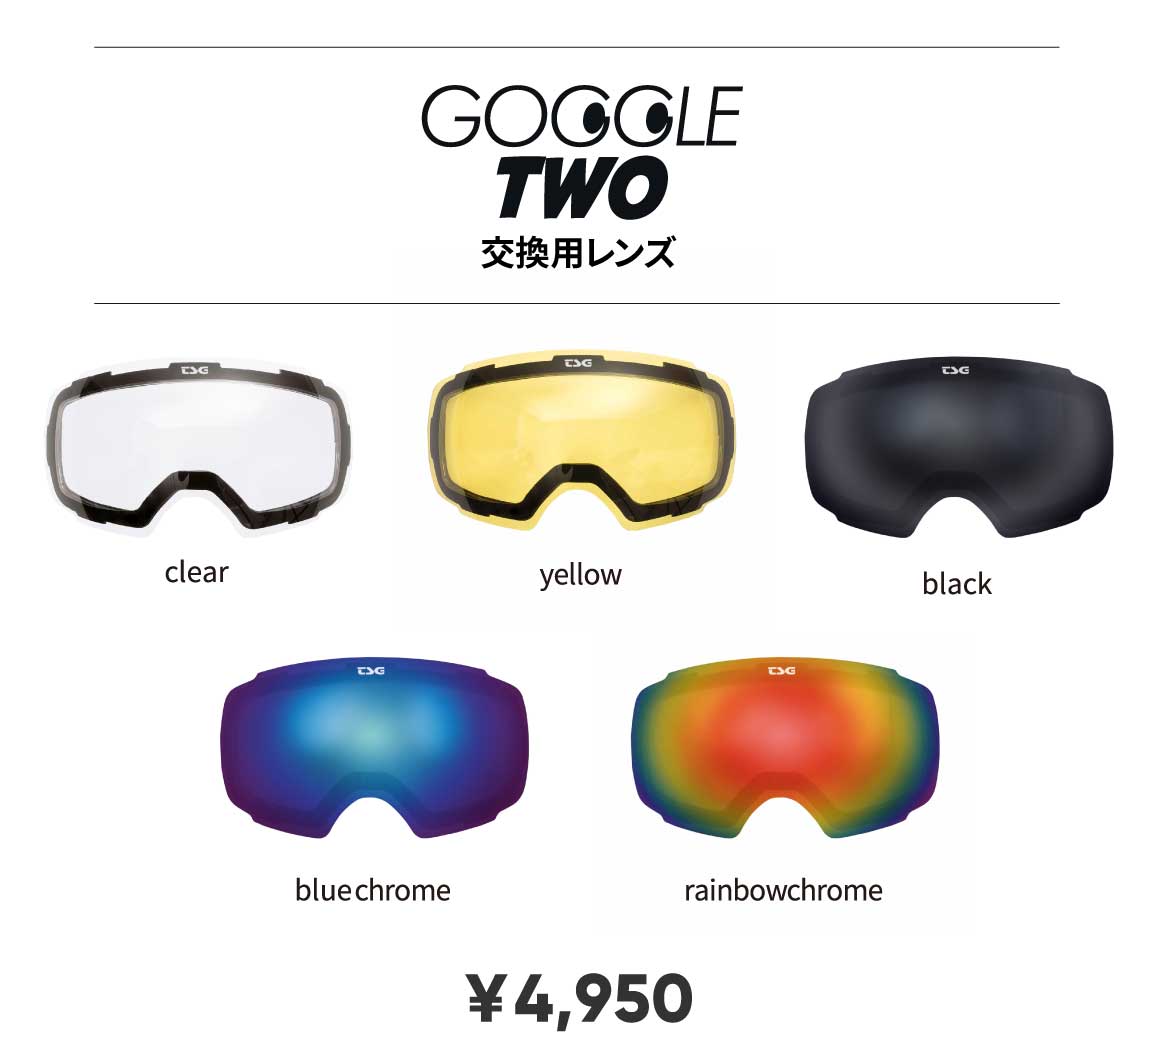 Goggle Two 交換用レンズ